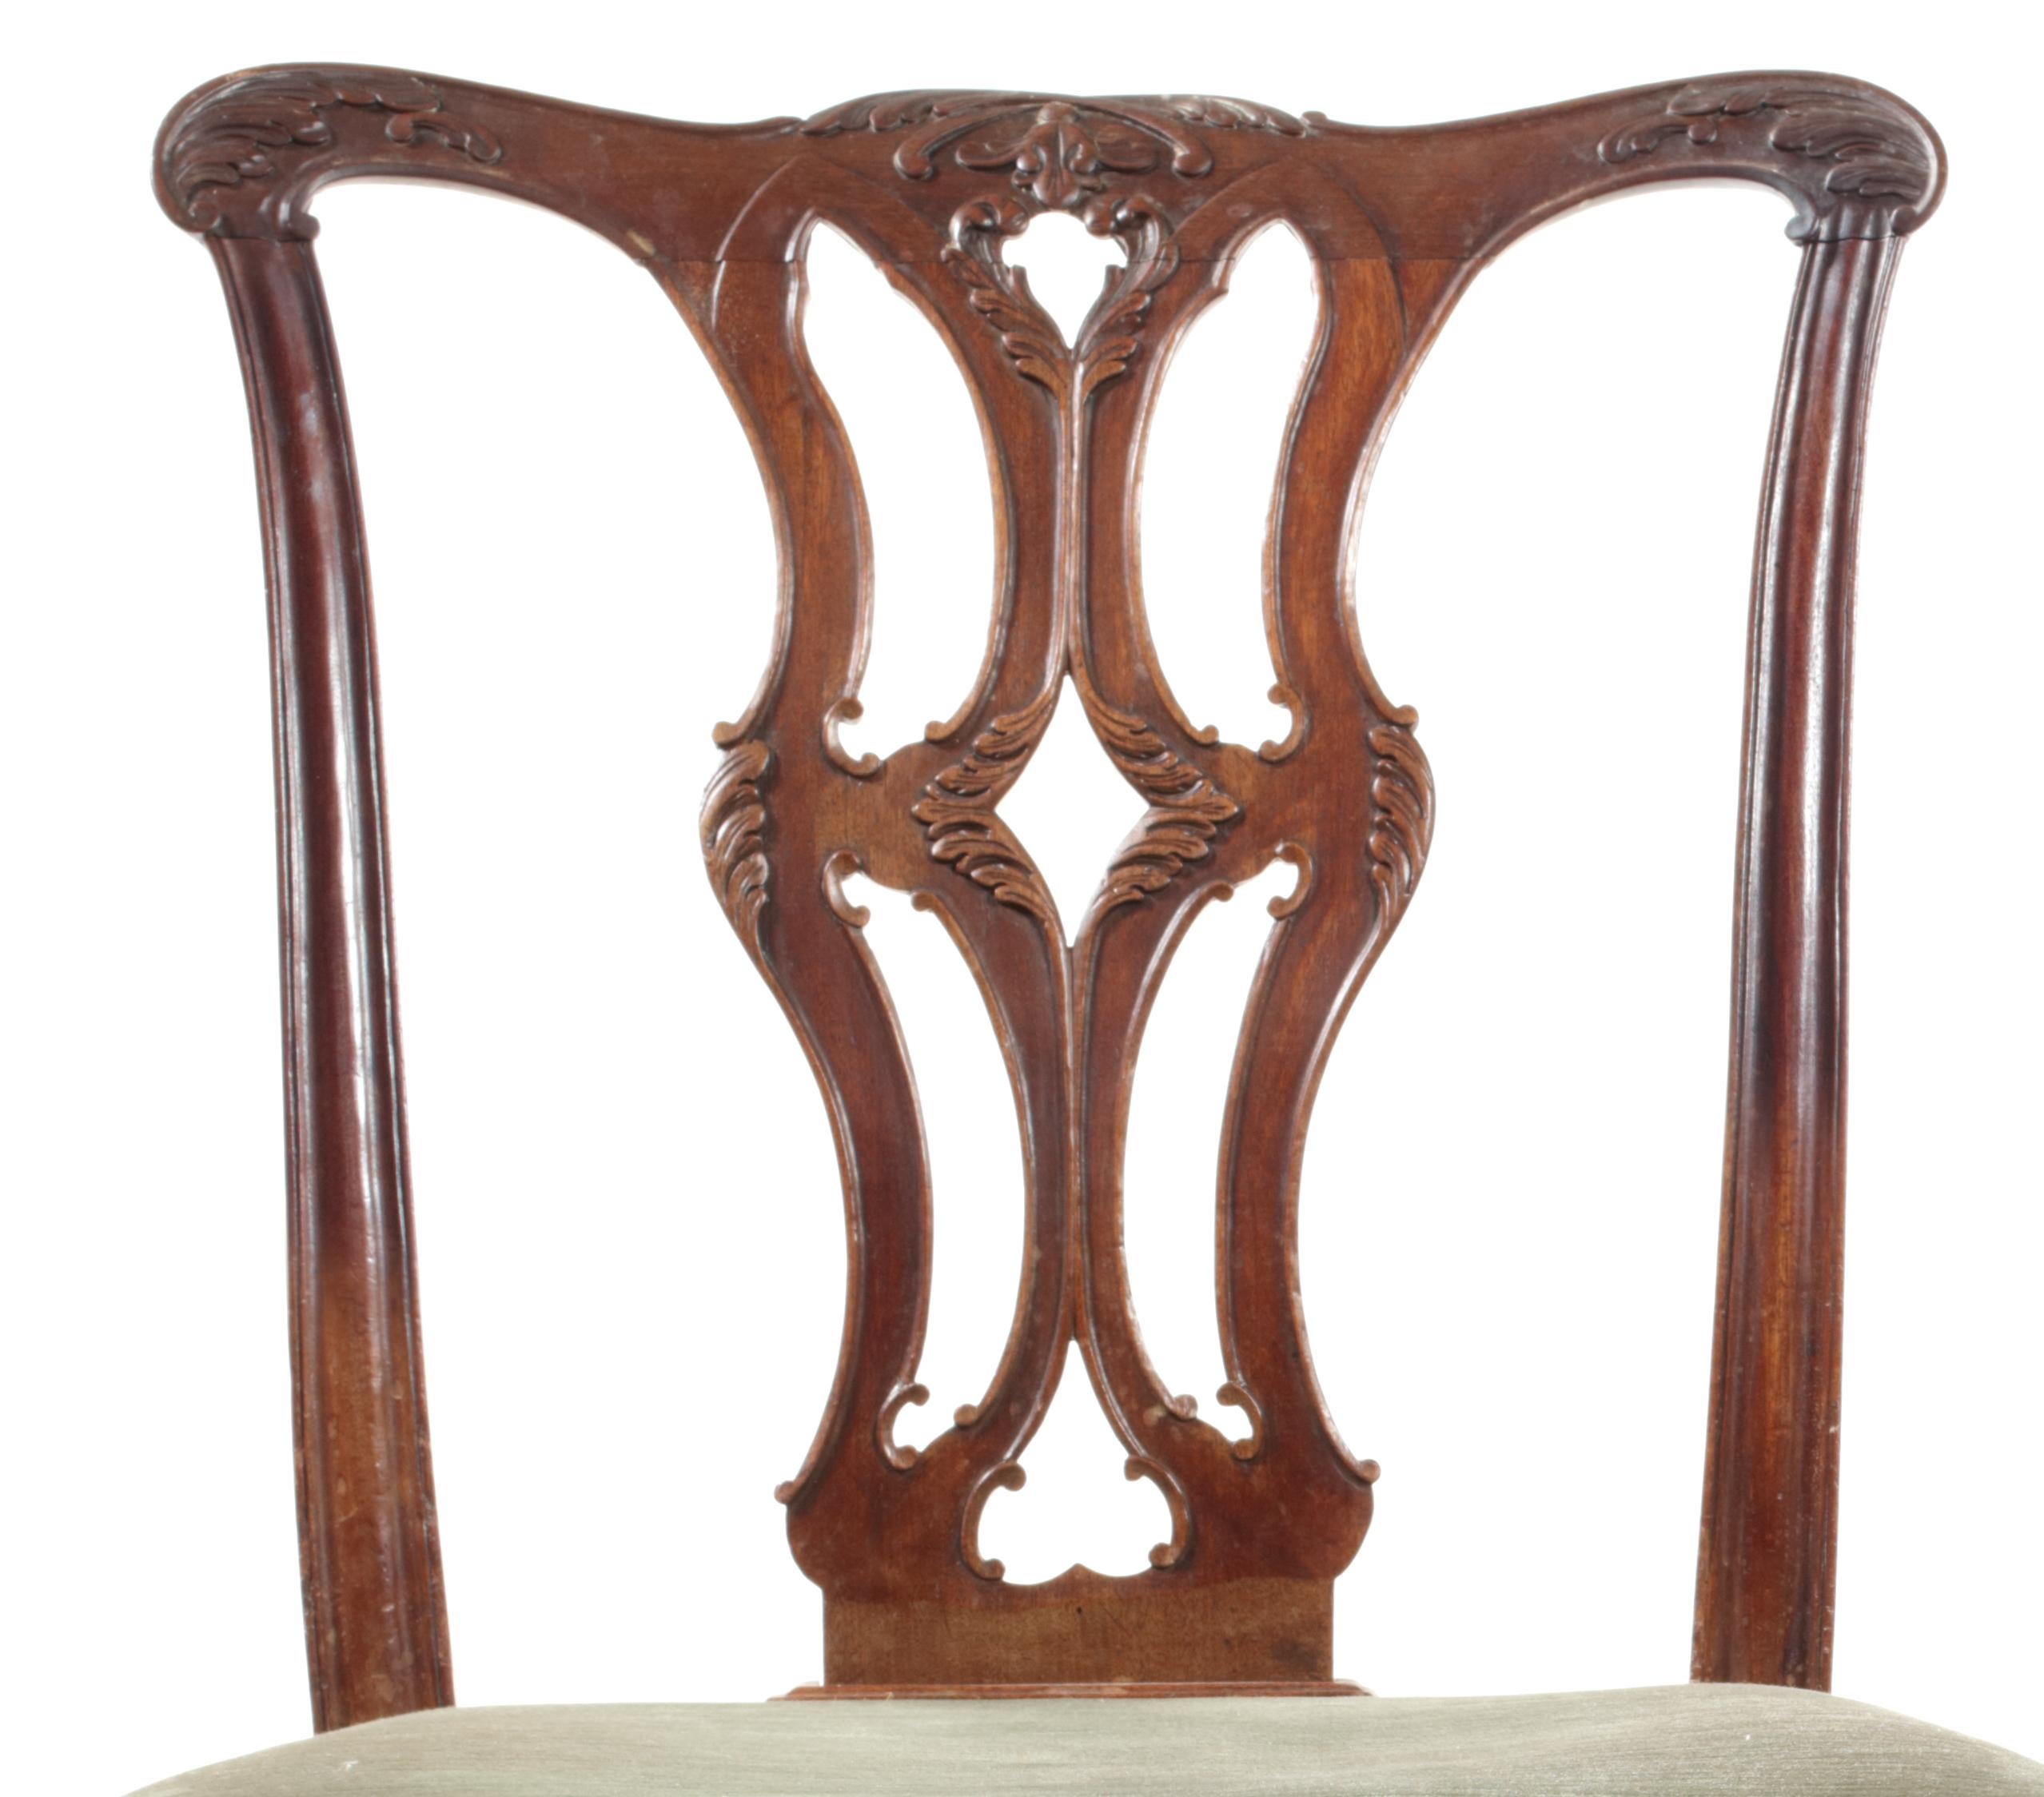 A pair of George III carved mahogany dining chairs in the Chippendale Gothic taste
The serpentine acanthus and bellflower carved top-rails above pierced splat above serpentine padded seats on square moulded legs with leaf carved brackets and 'H'